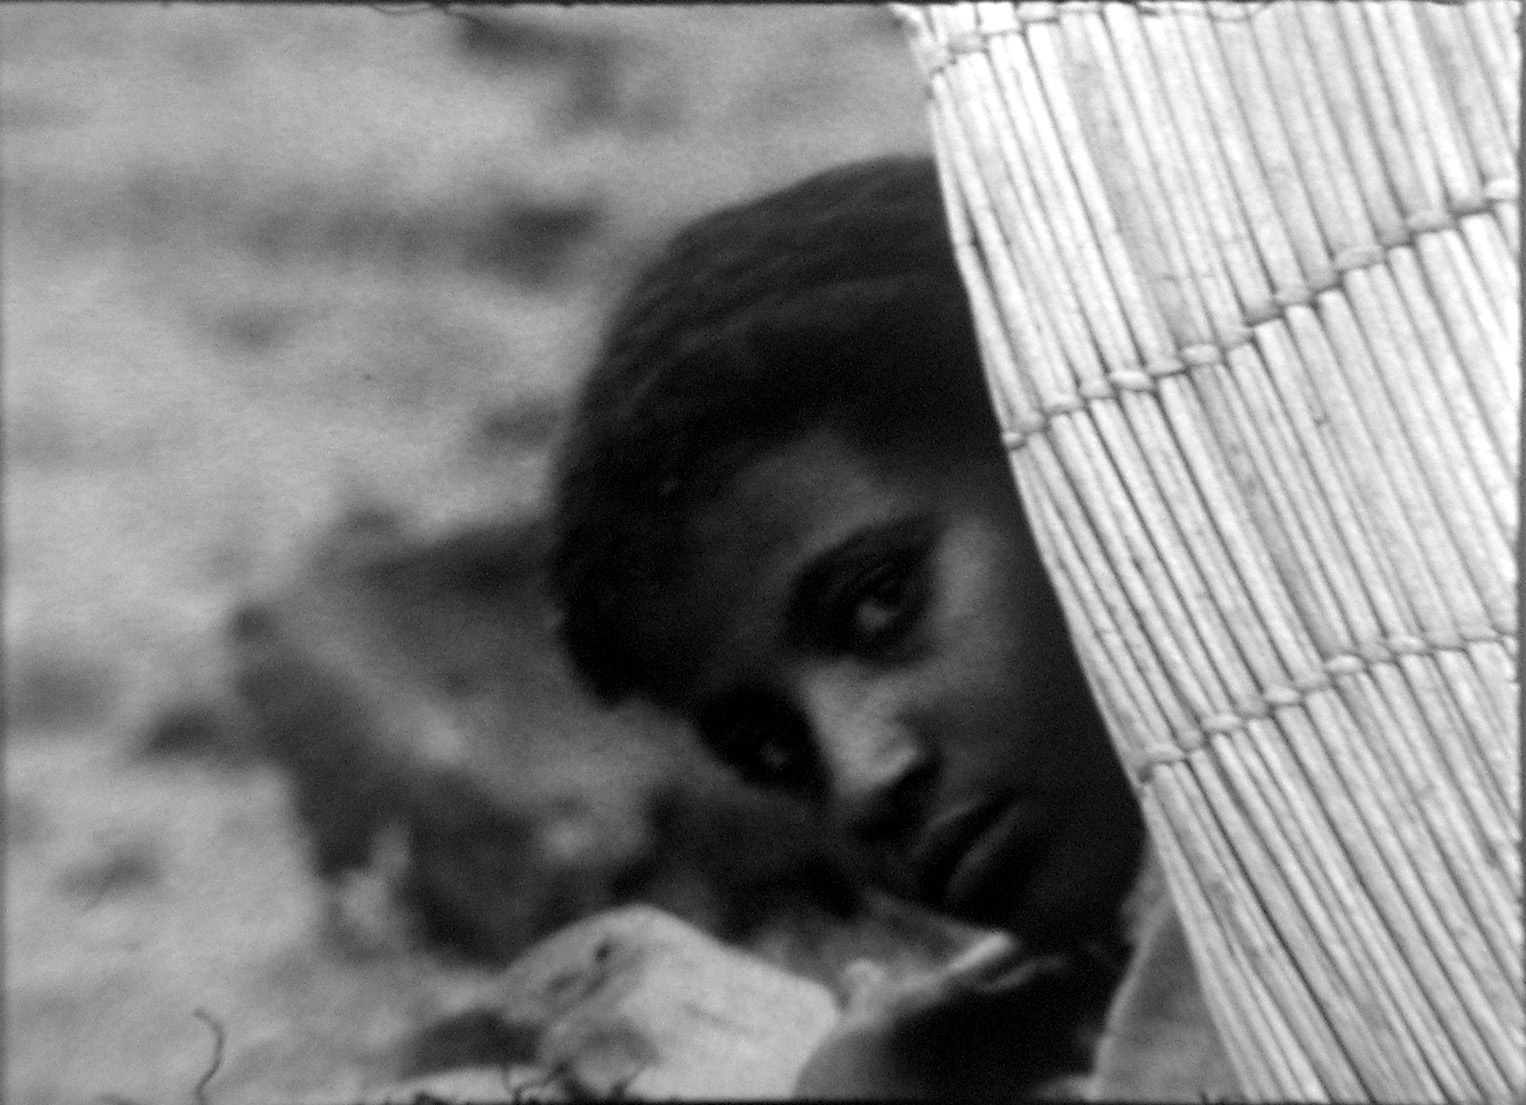 A Black person peers around a wicker object. In black and white.